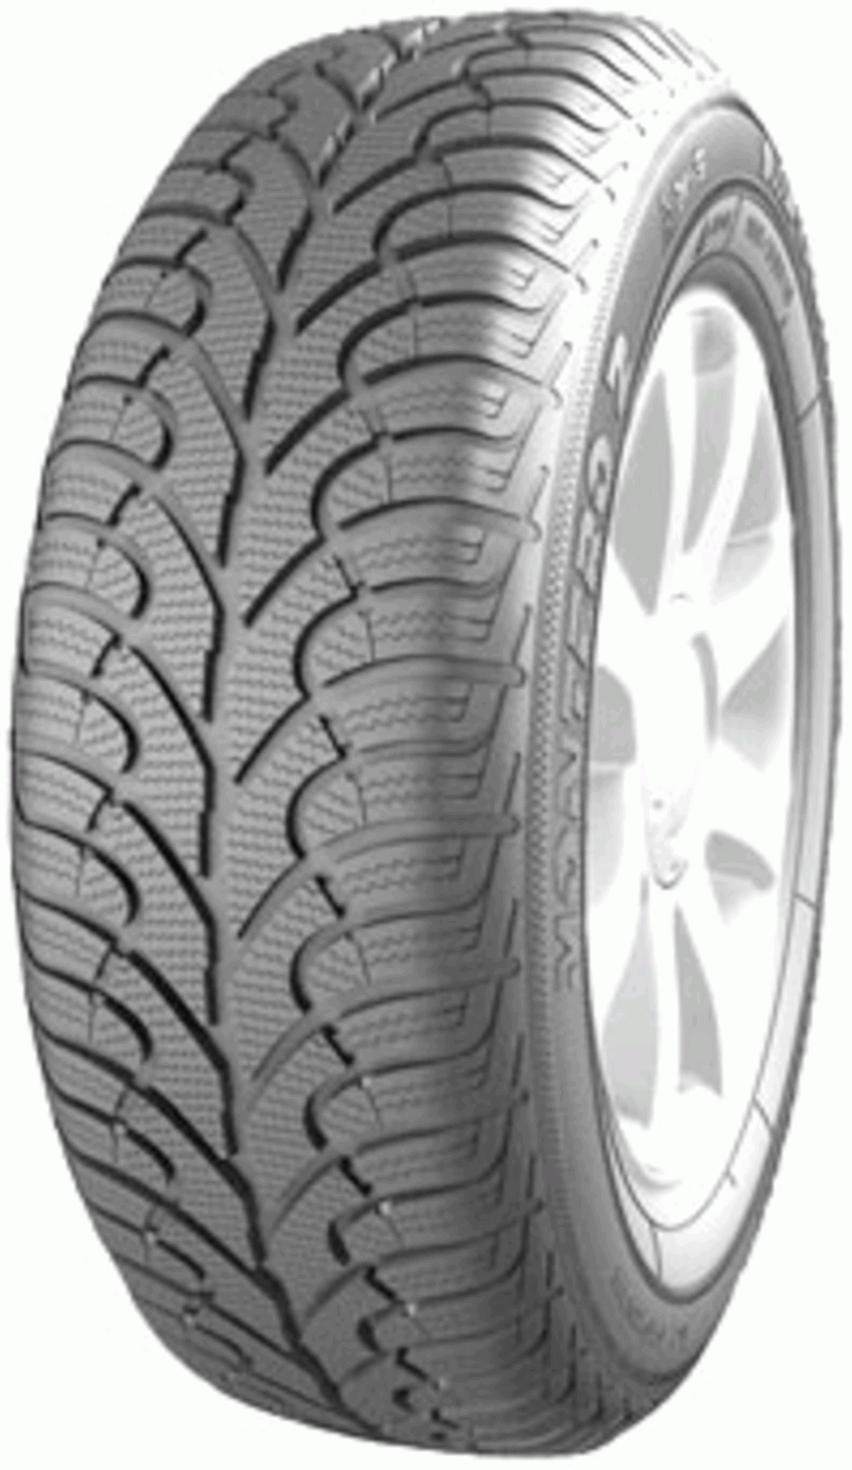 Fulda Kristall Montero 2 Tests Tyre Reviews - and